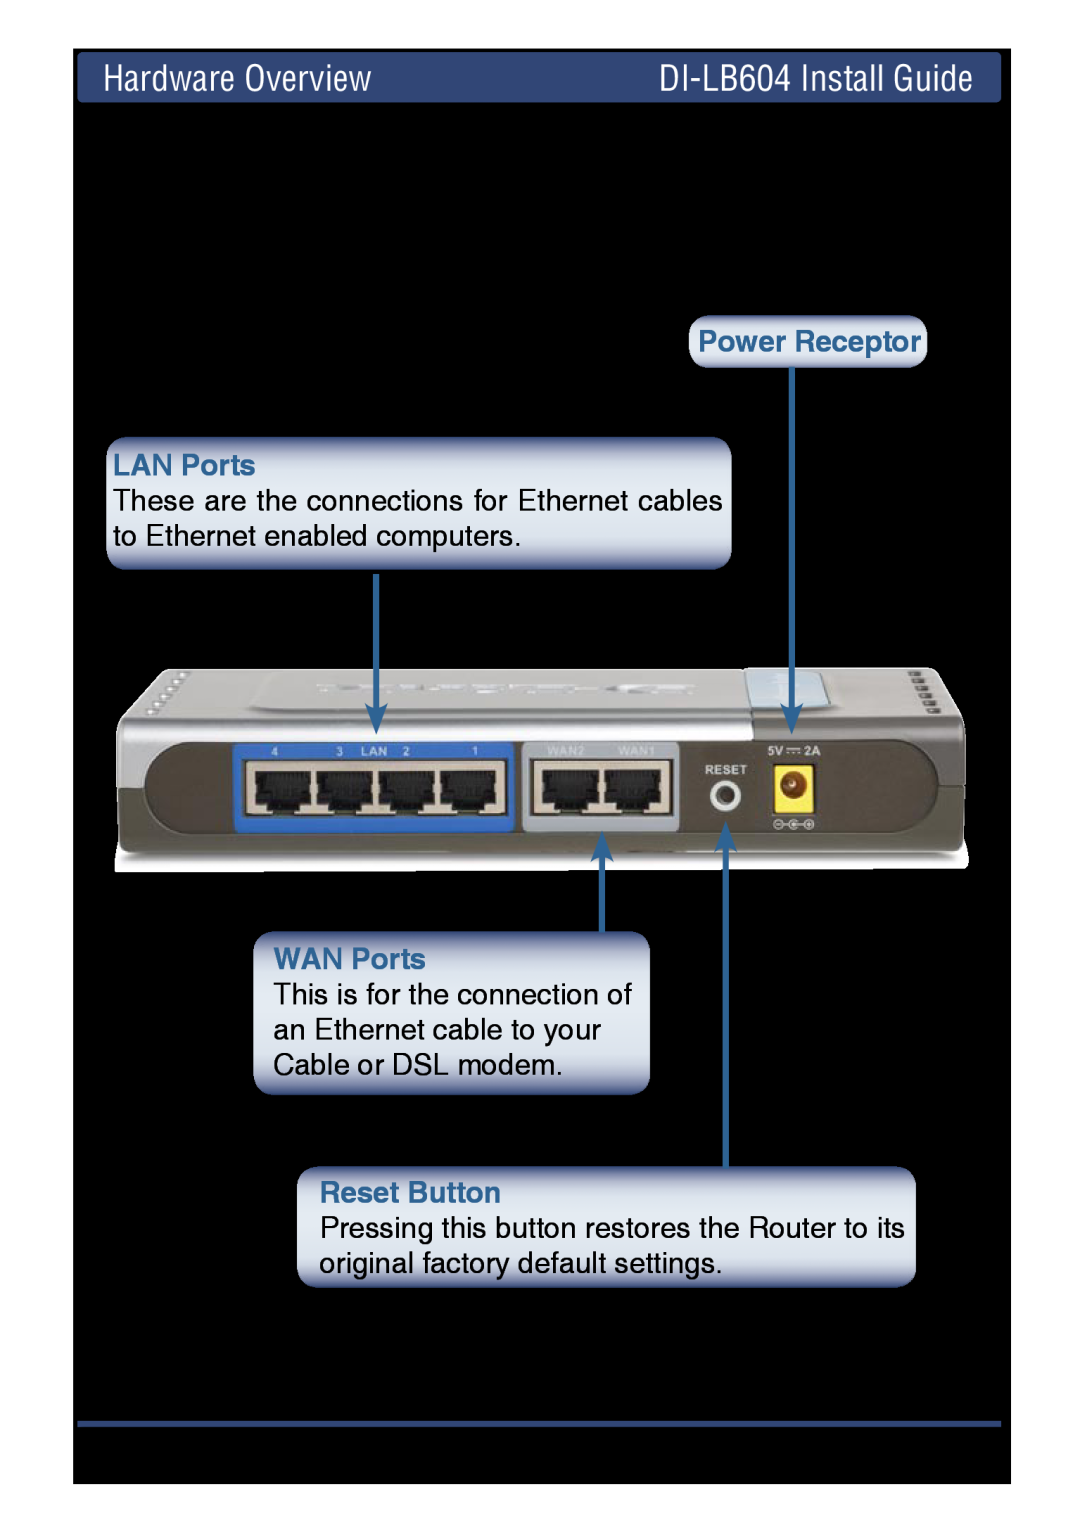 D-Link Back Panel Connections, Hardware Overview, DI-LB604 Install Guide, D-Link Systems, Inc, Power Receptor LAN Ports 